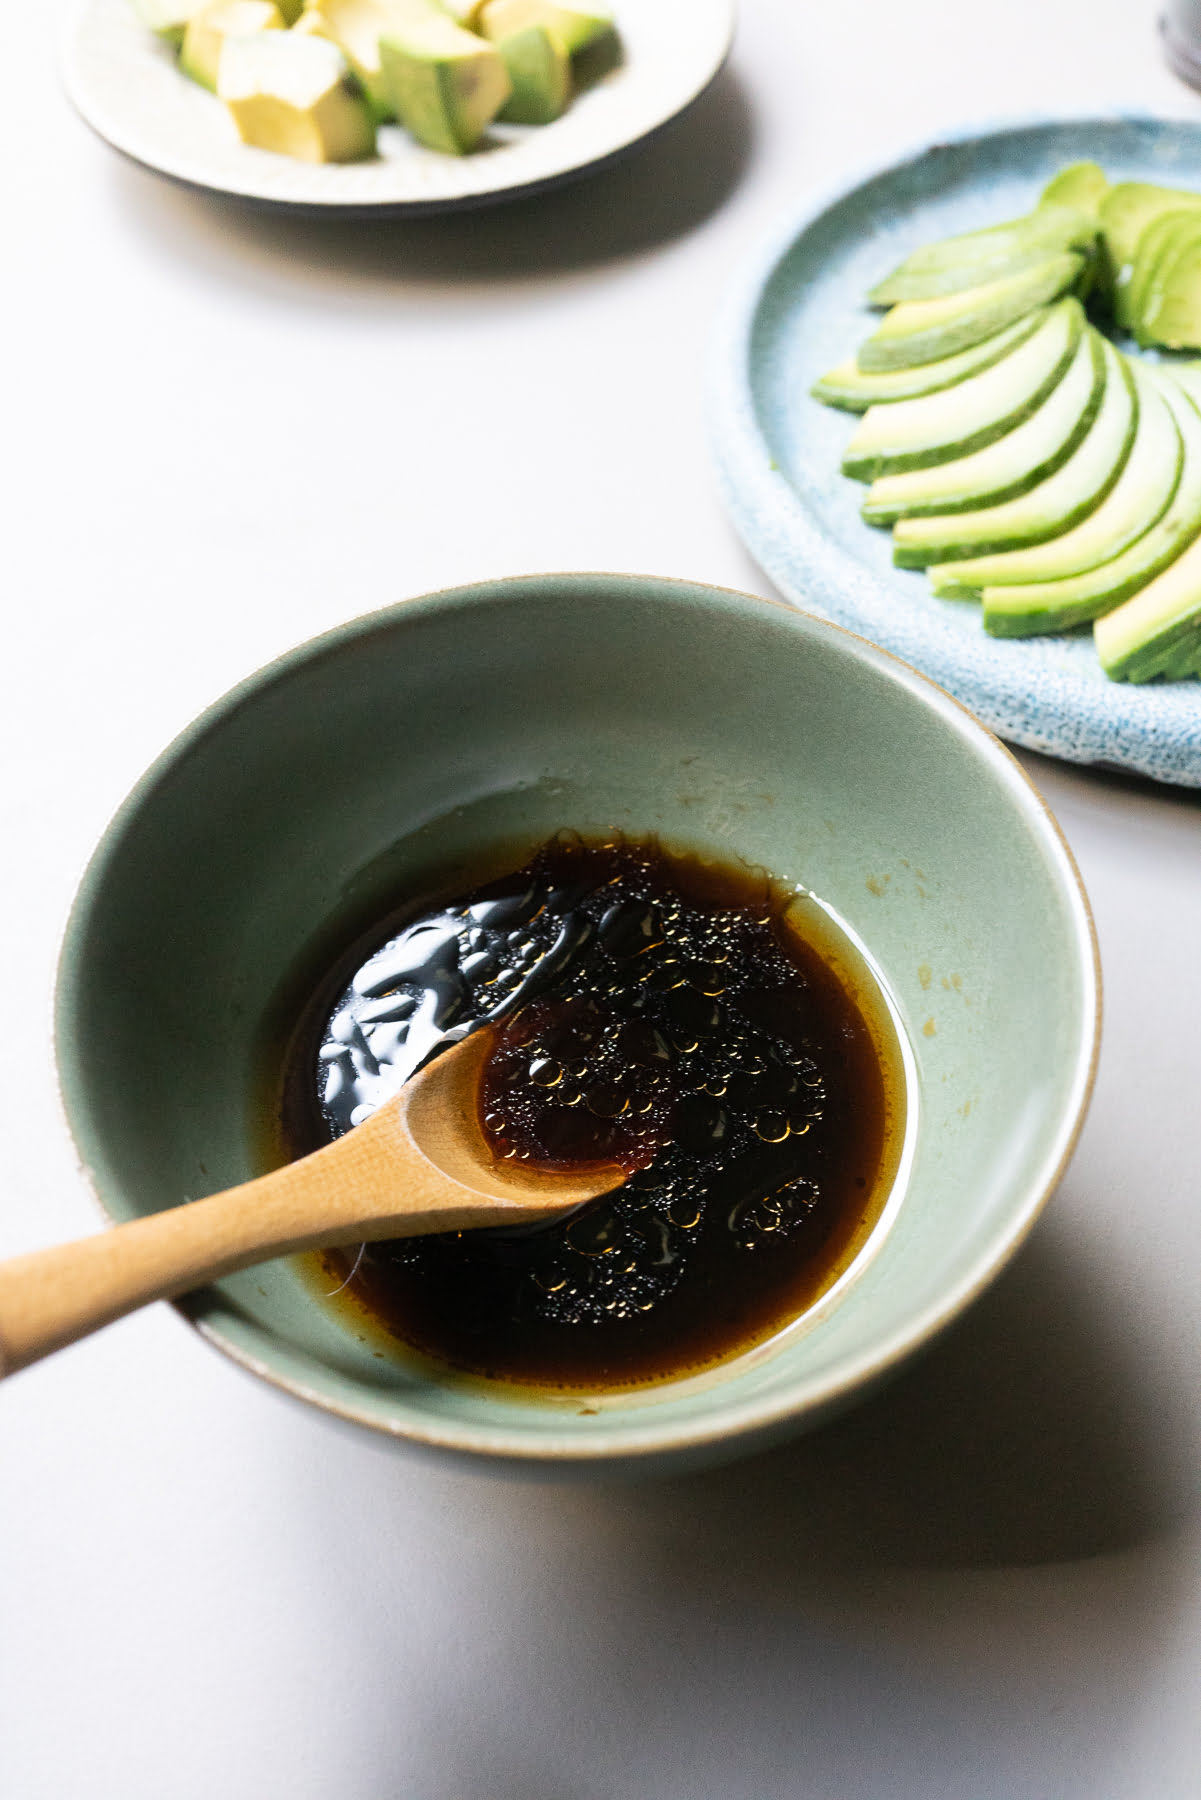 The dressing for Japanese avocado salad in a bowl (a mixture of rice vinegar, soy sauce, and sesame oil).